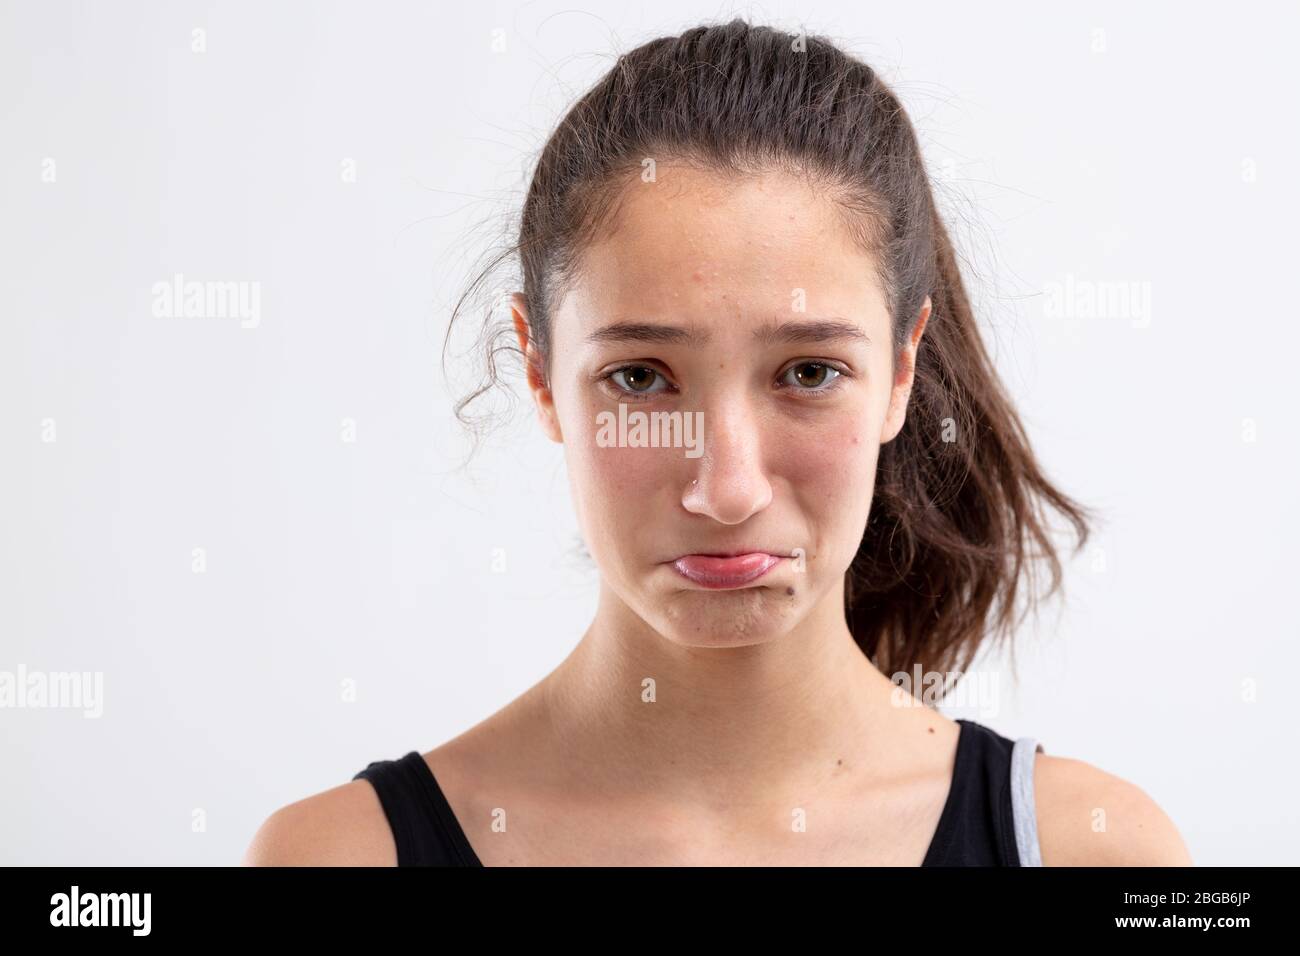 Sulky miserable young woman pouting her lips and looking at the camera with sorrowful eyes in a close up head shot on white Stock Photo